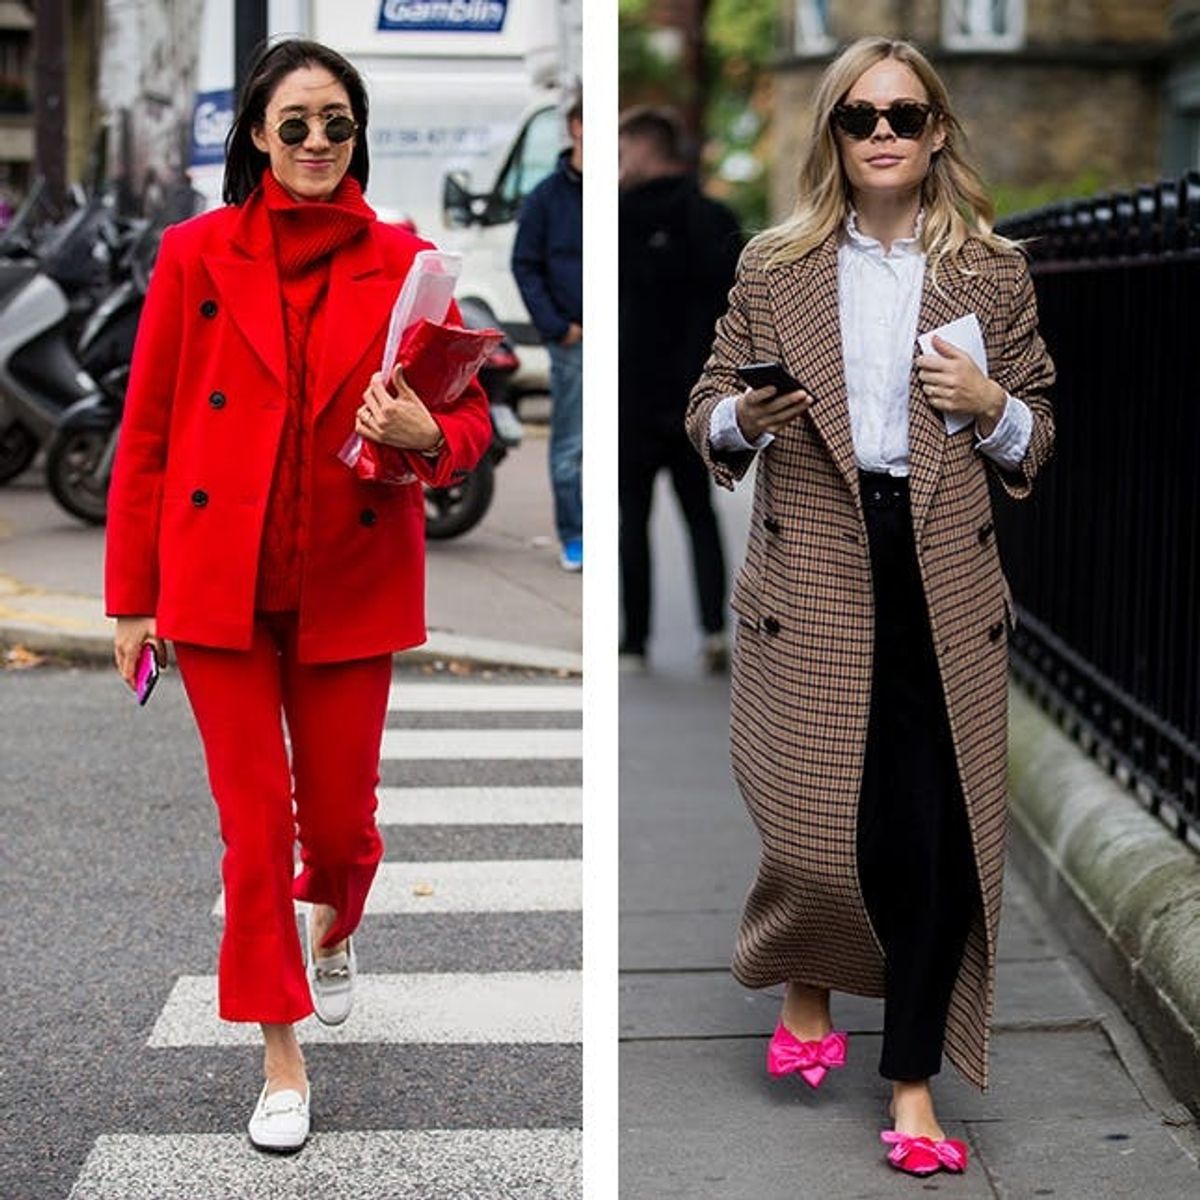 The Fashion Girl Way to Wear Flats This Winter